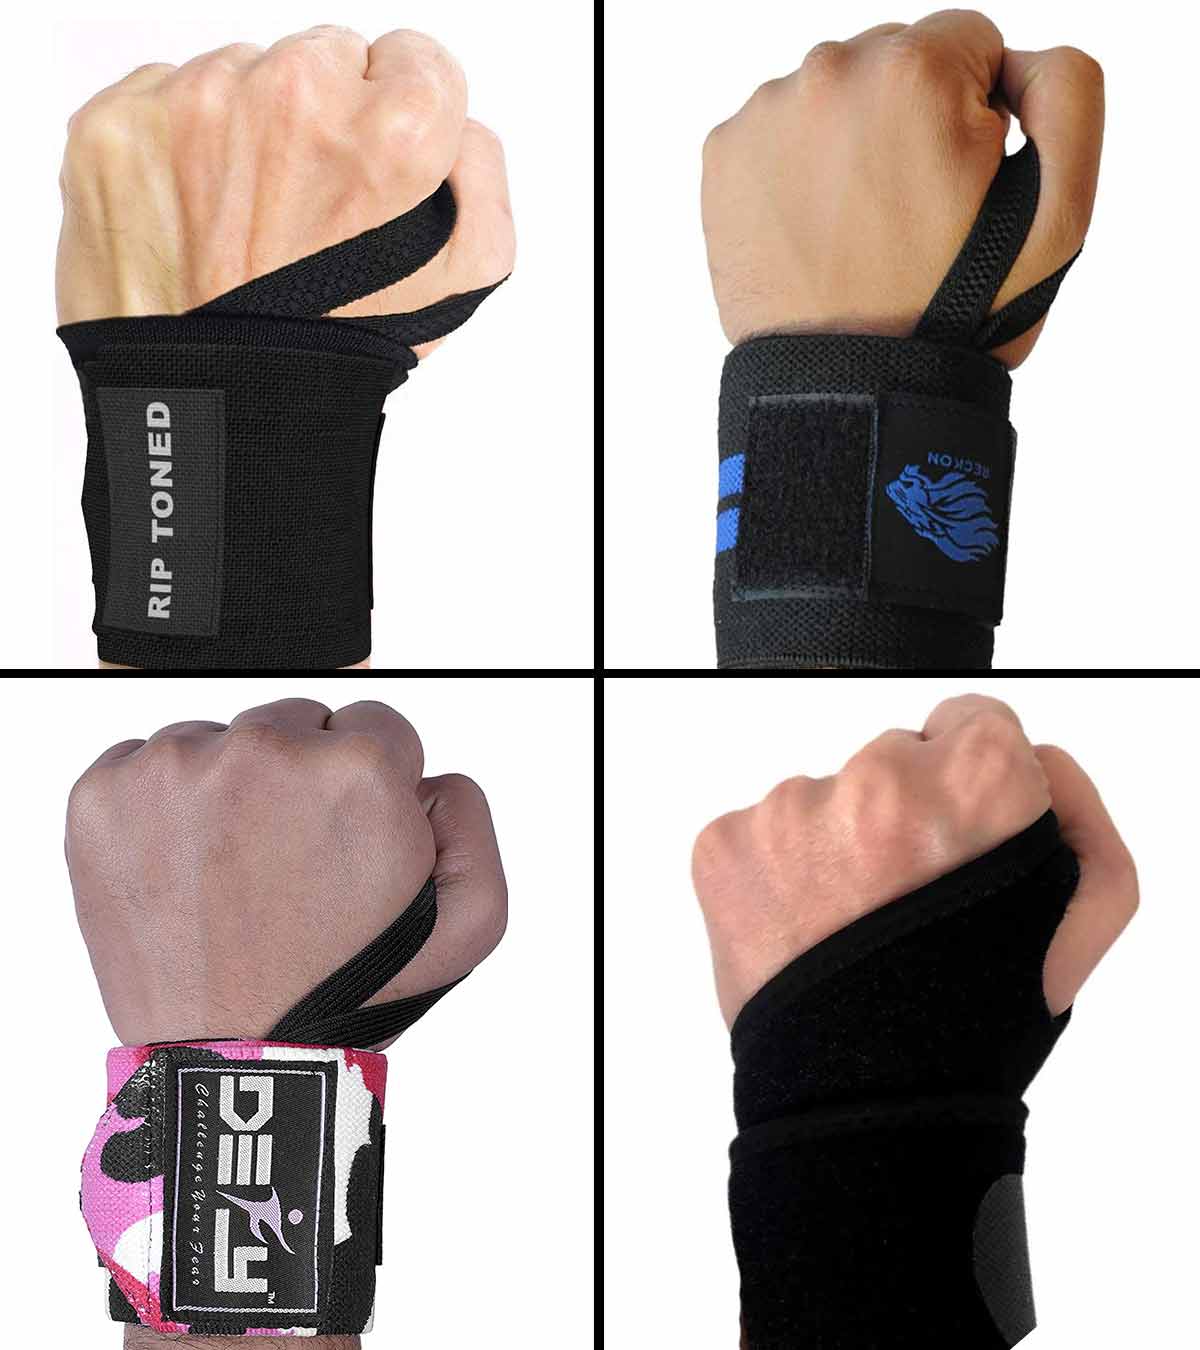 20 vs 36 Inch Wrist Wraps: Which Size Is Best For You